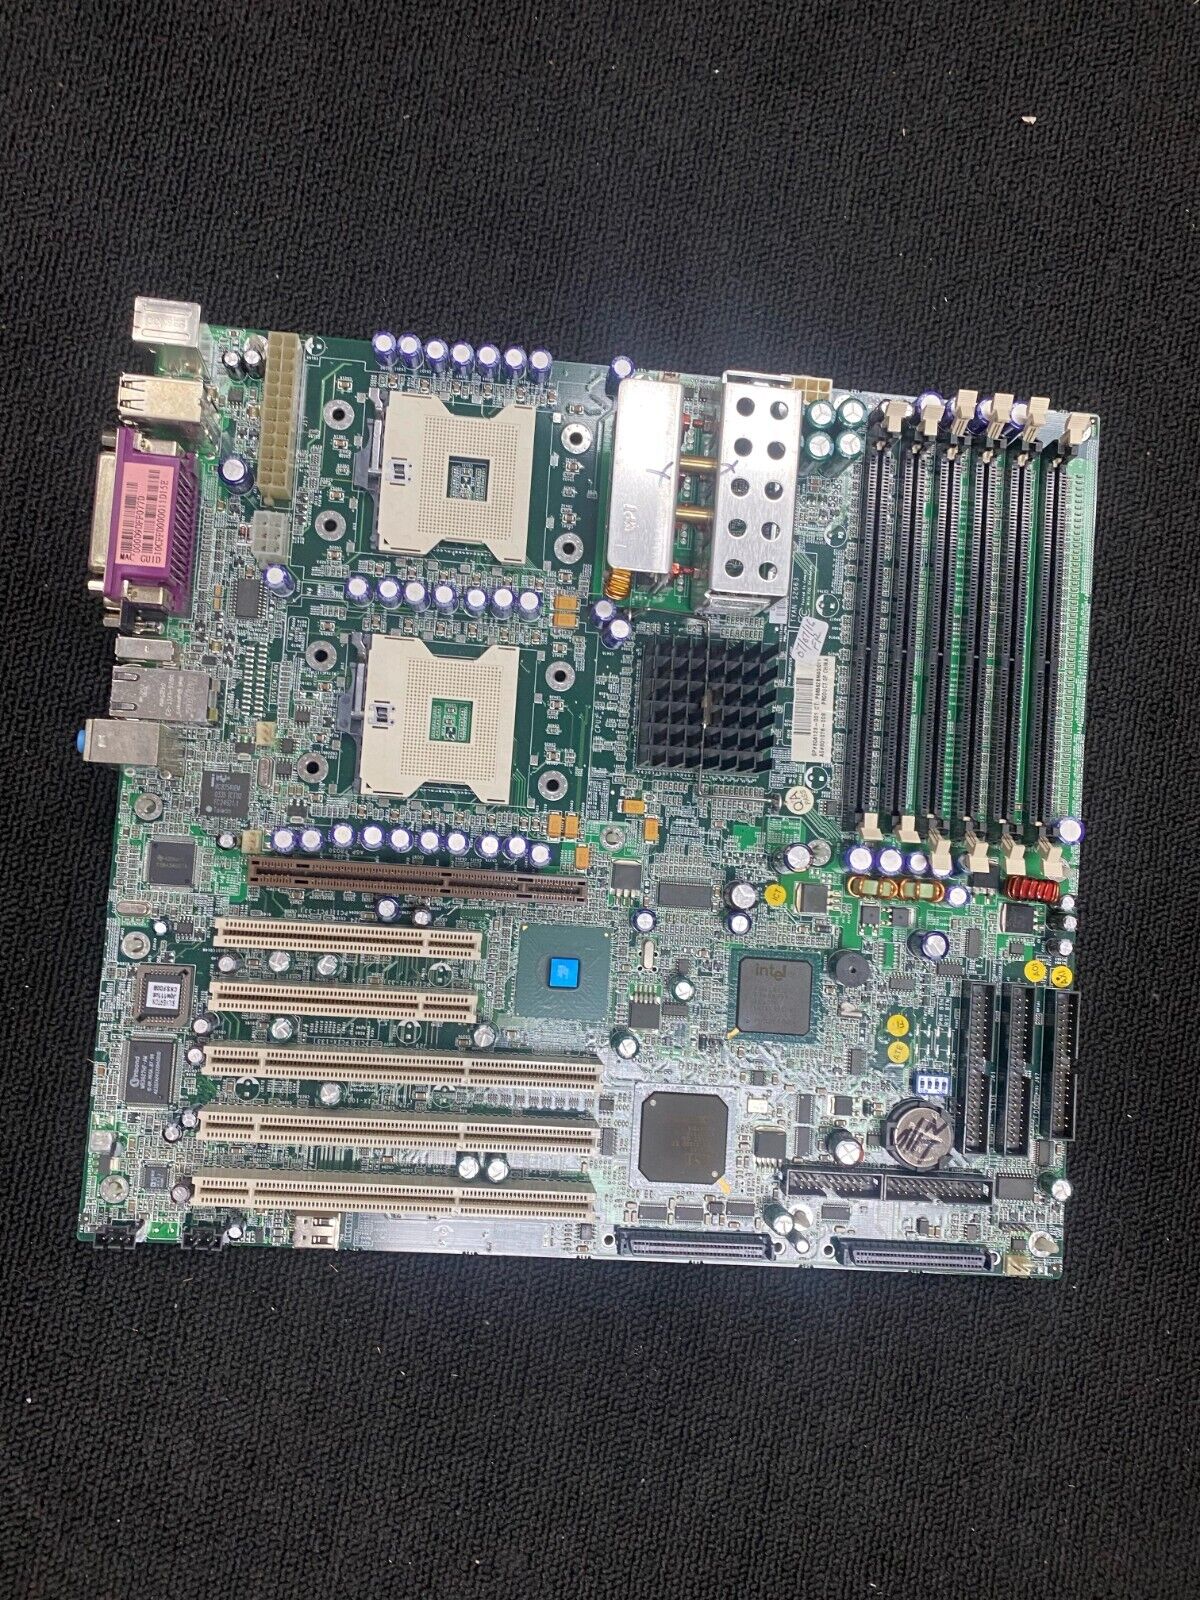 1pc For HP XW8000 workstation motherboard 304123-001 301076-001 002 003